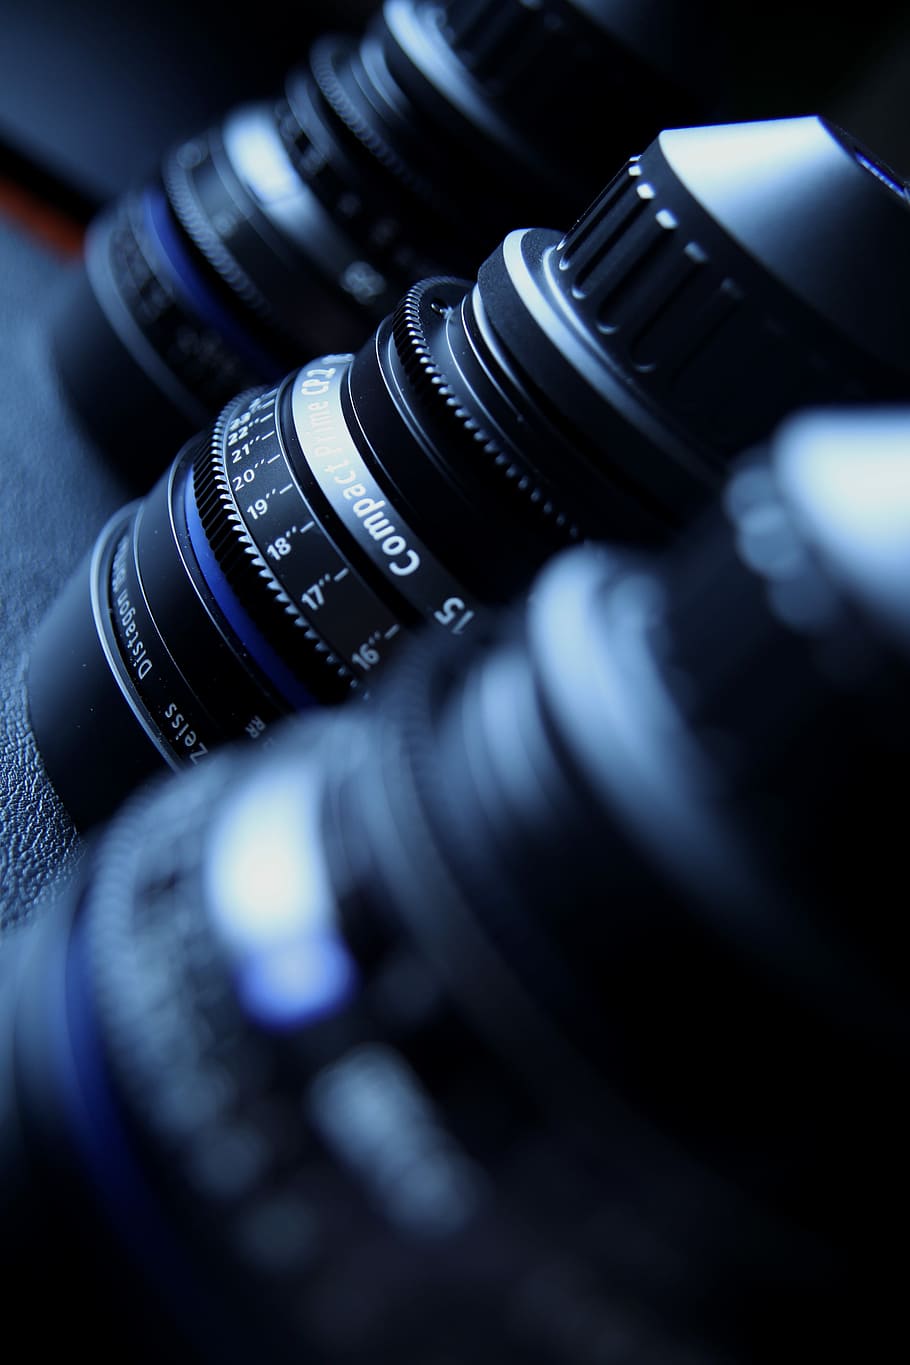 three, black, camera, zoom, lenses, surface, lens, carl zeiss, cinema, cinematography